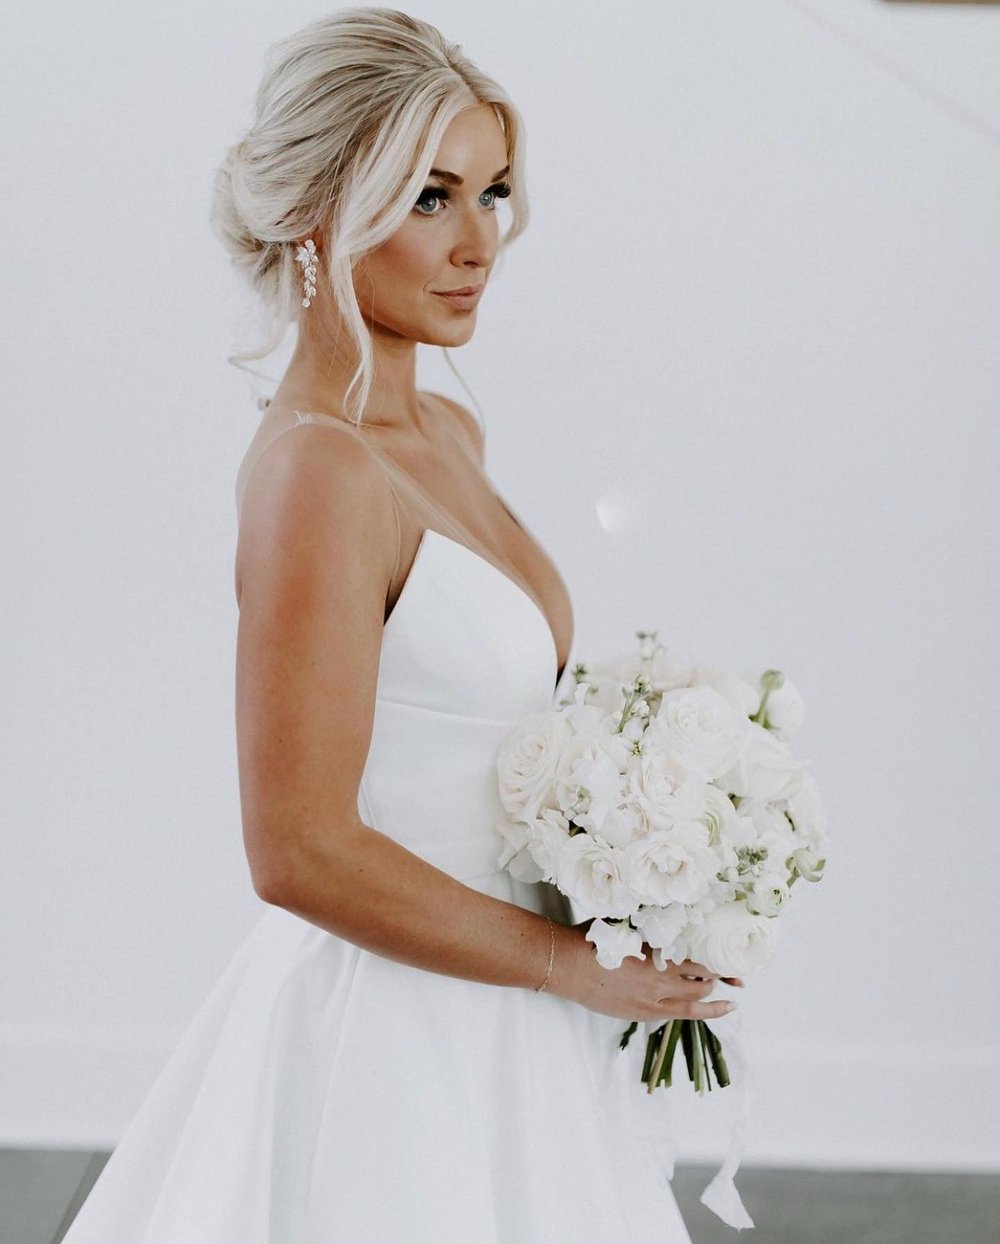 GoGLOW Sunless tanning for brides and wedding parties